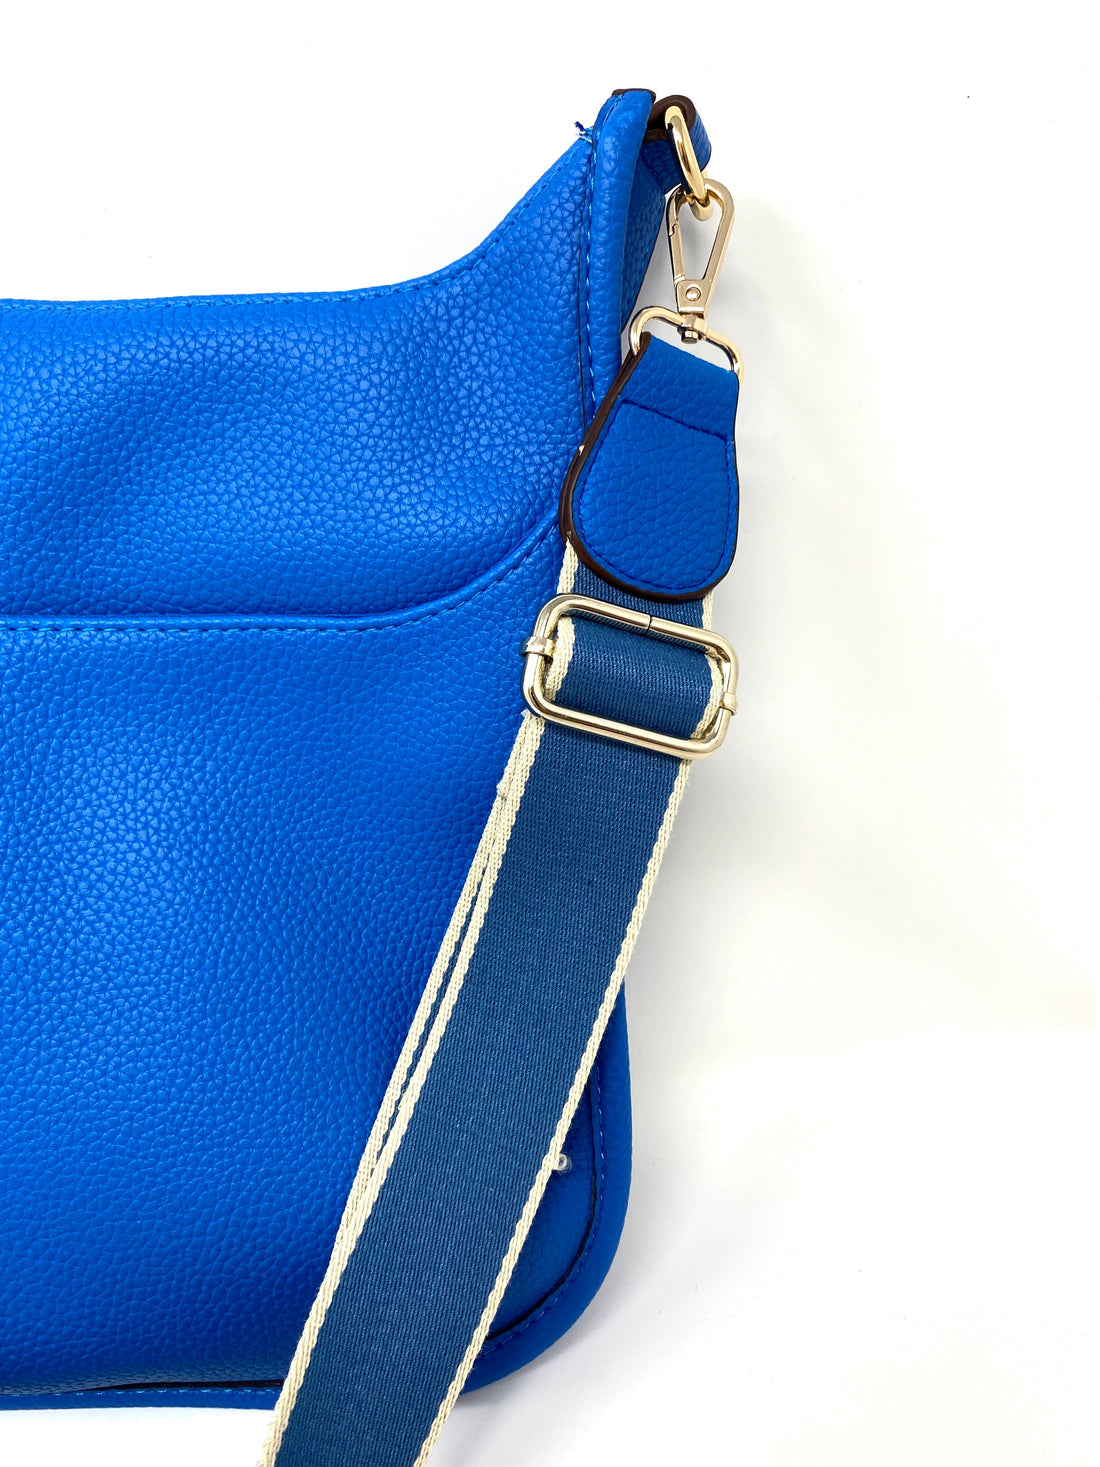 Saddle Bag in Vegan Leather in Electric Blue